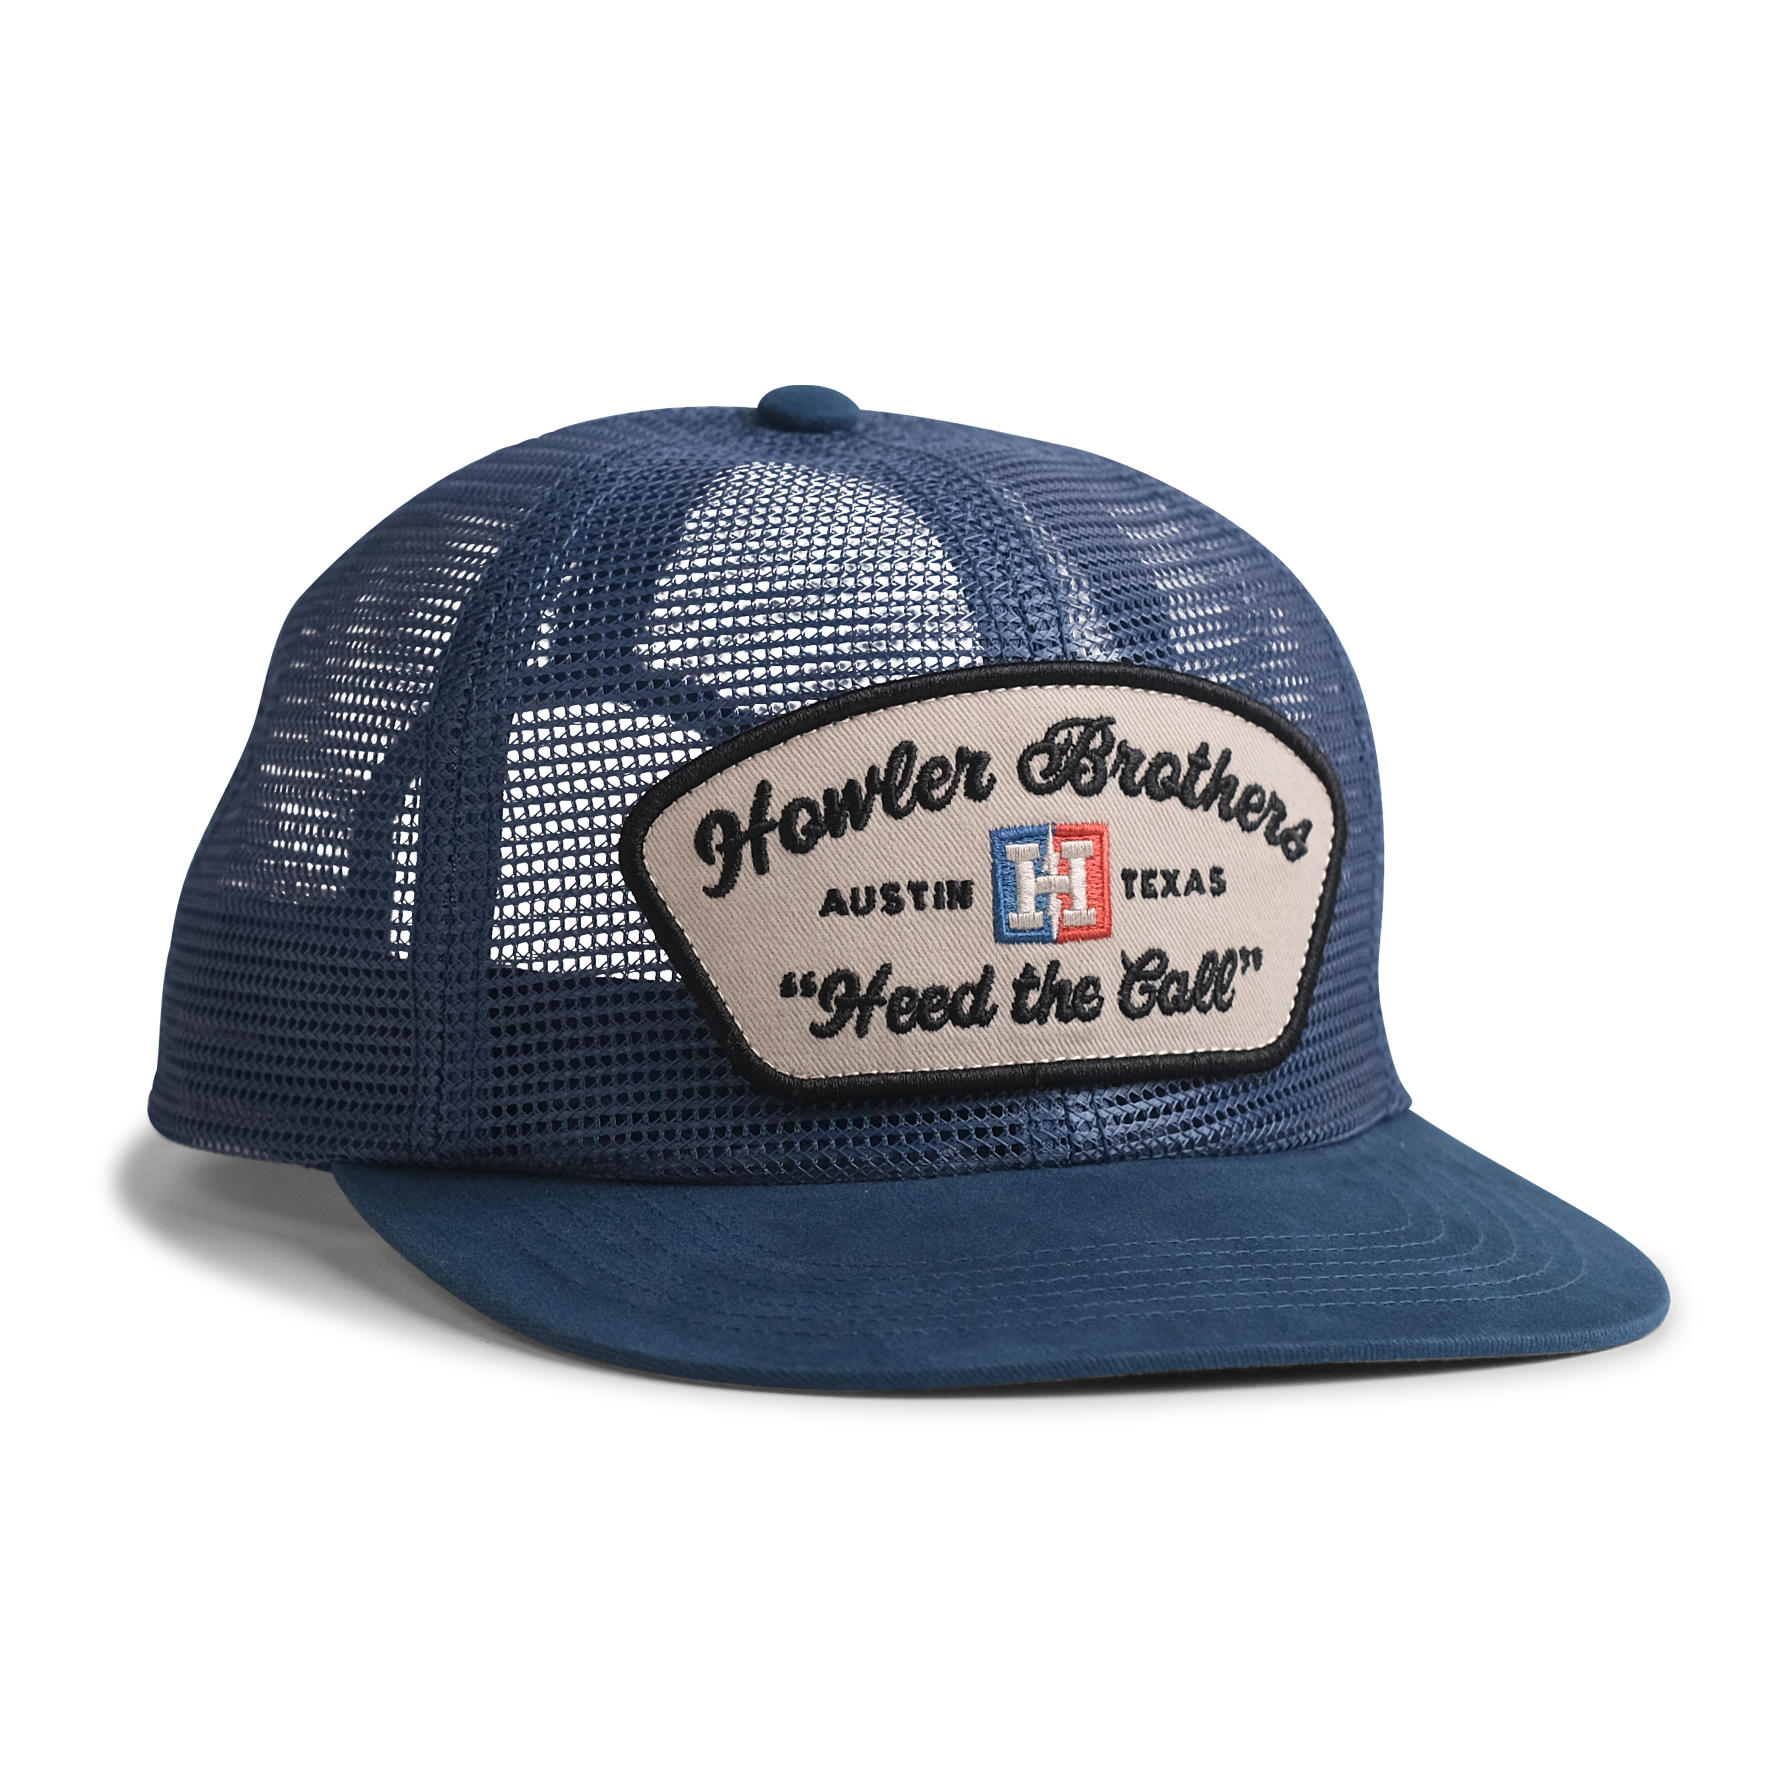 Howler Brothers Unstructured Snapback Hats : Feedstore